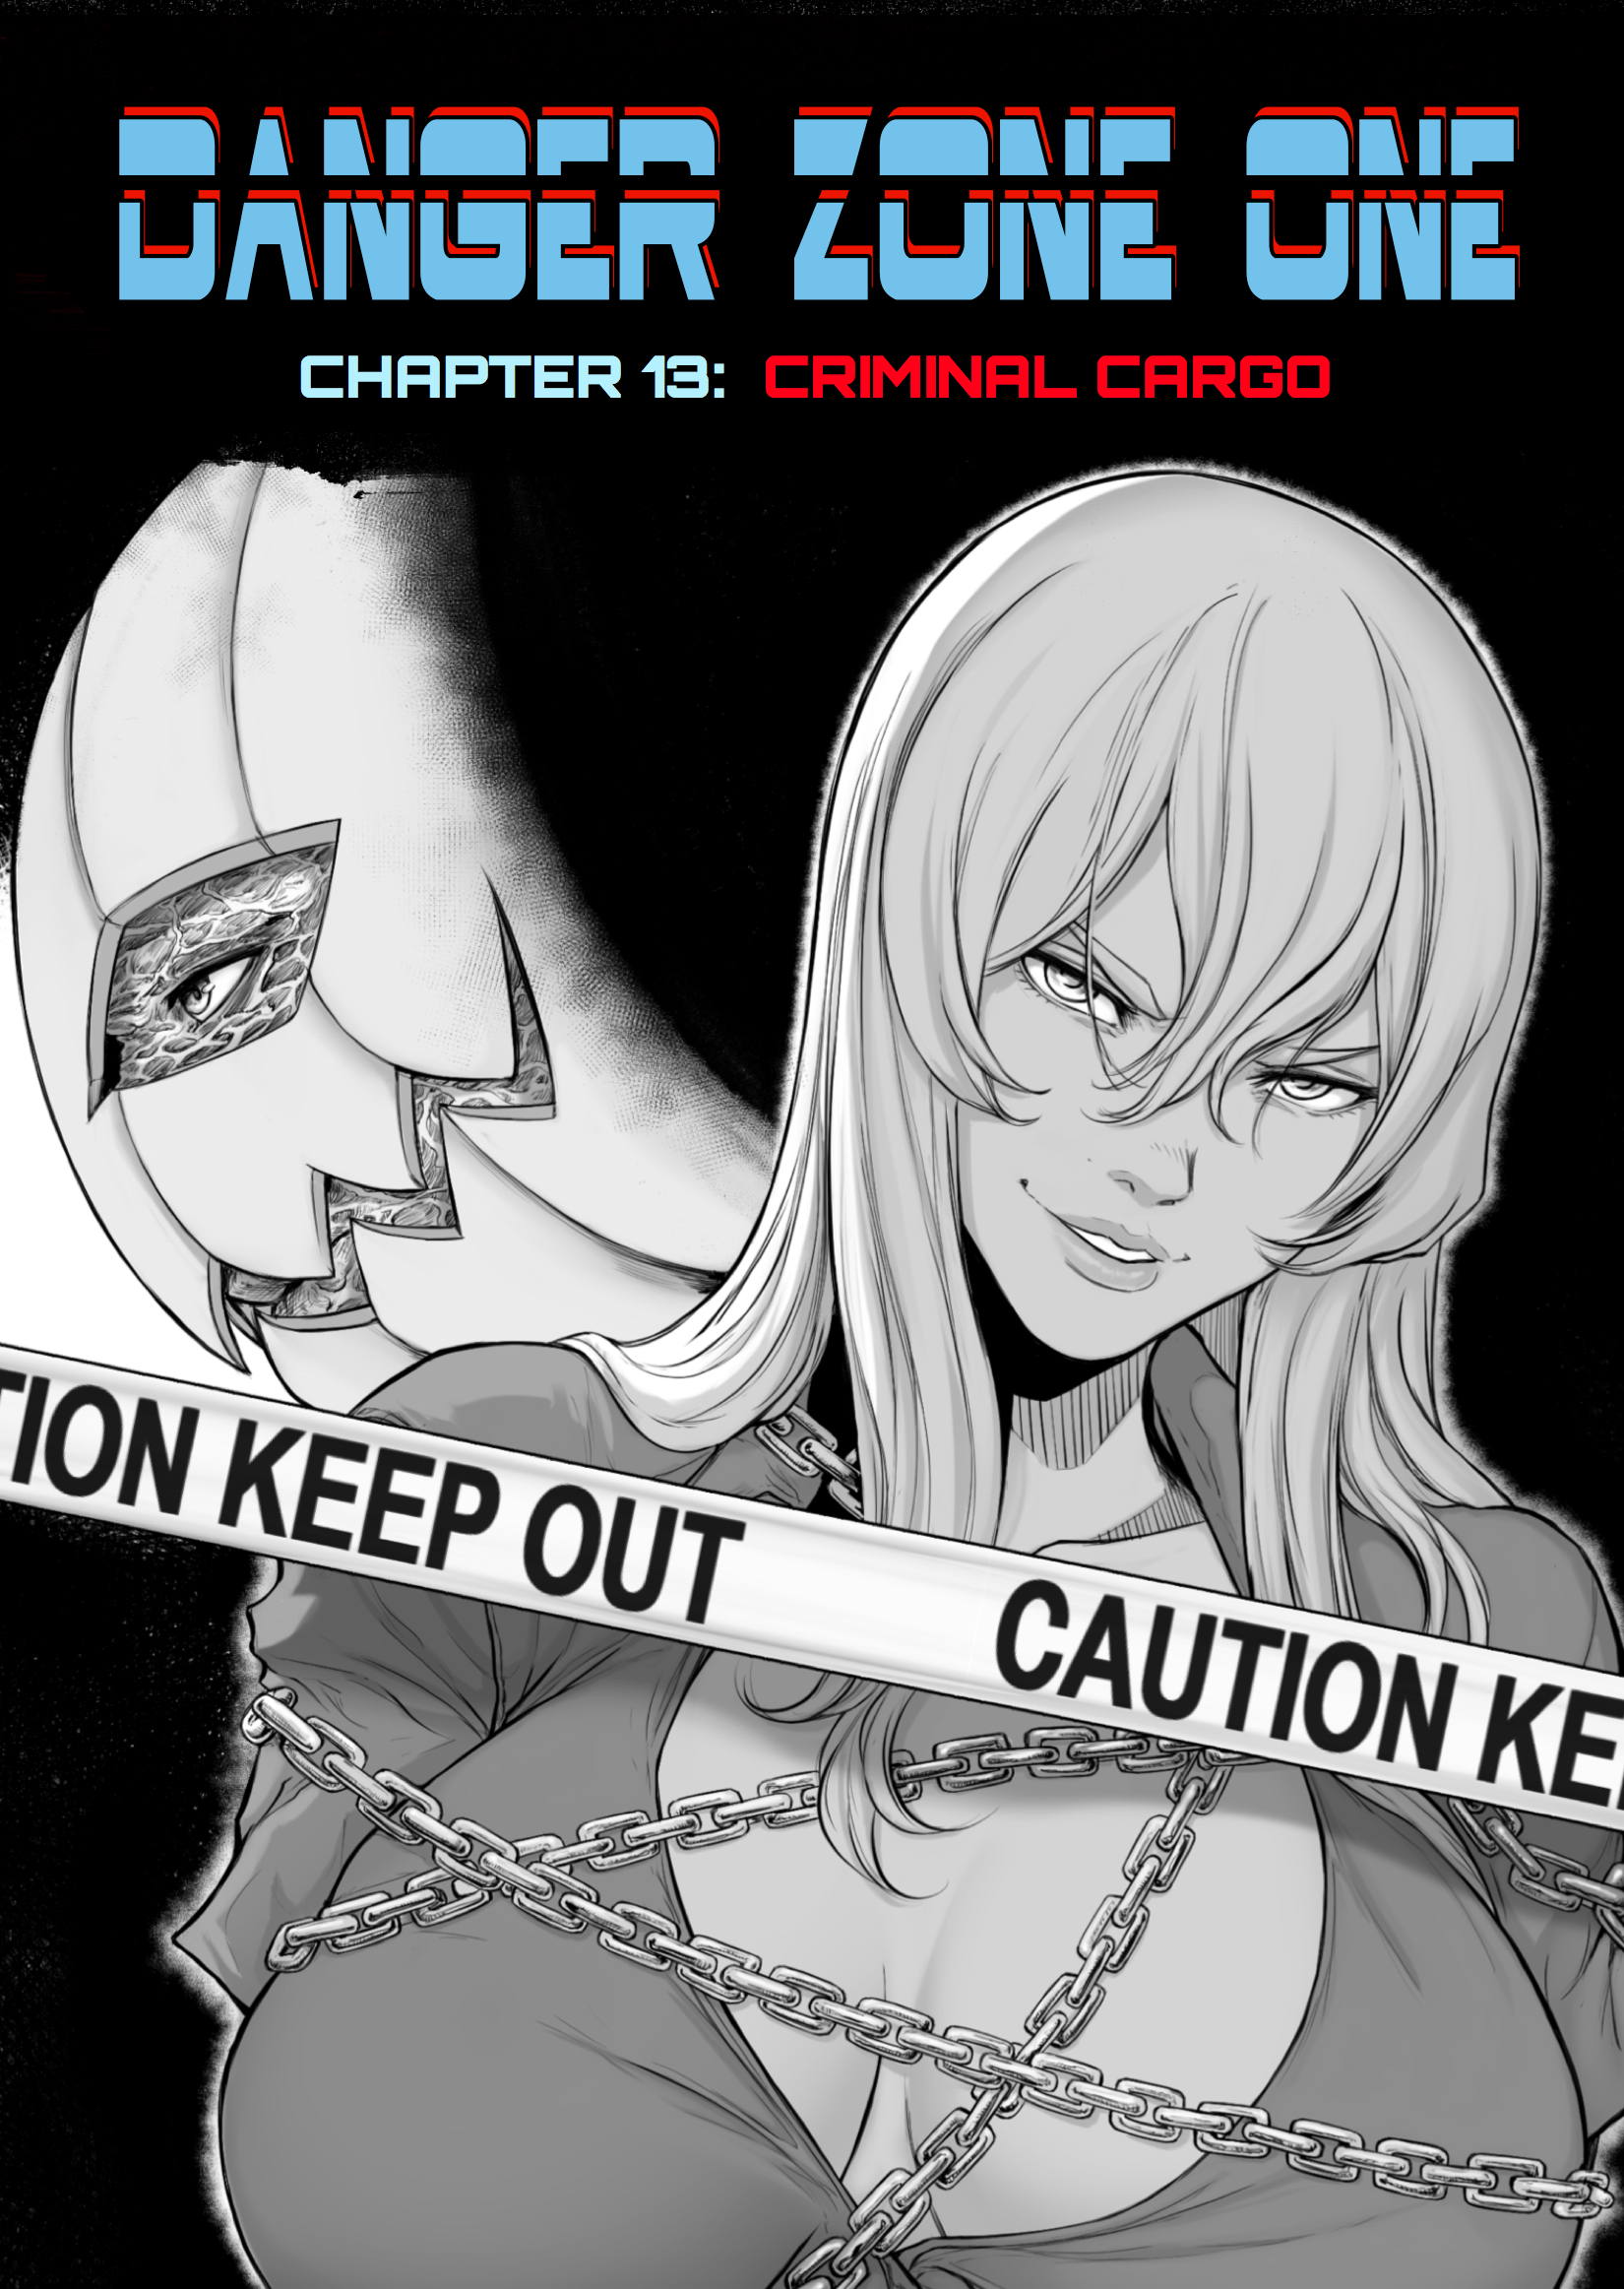 Danger Zone One Chapter 13